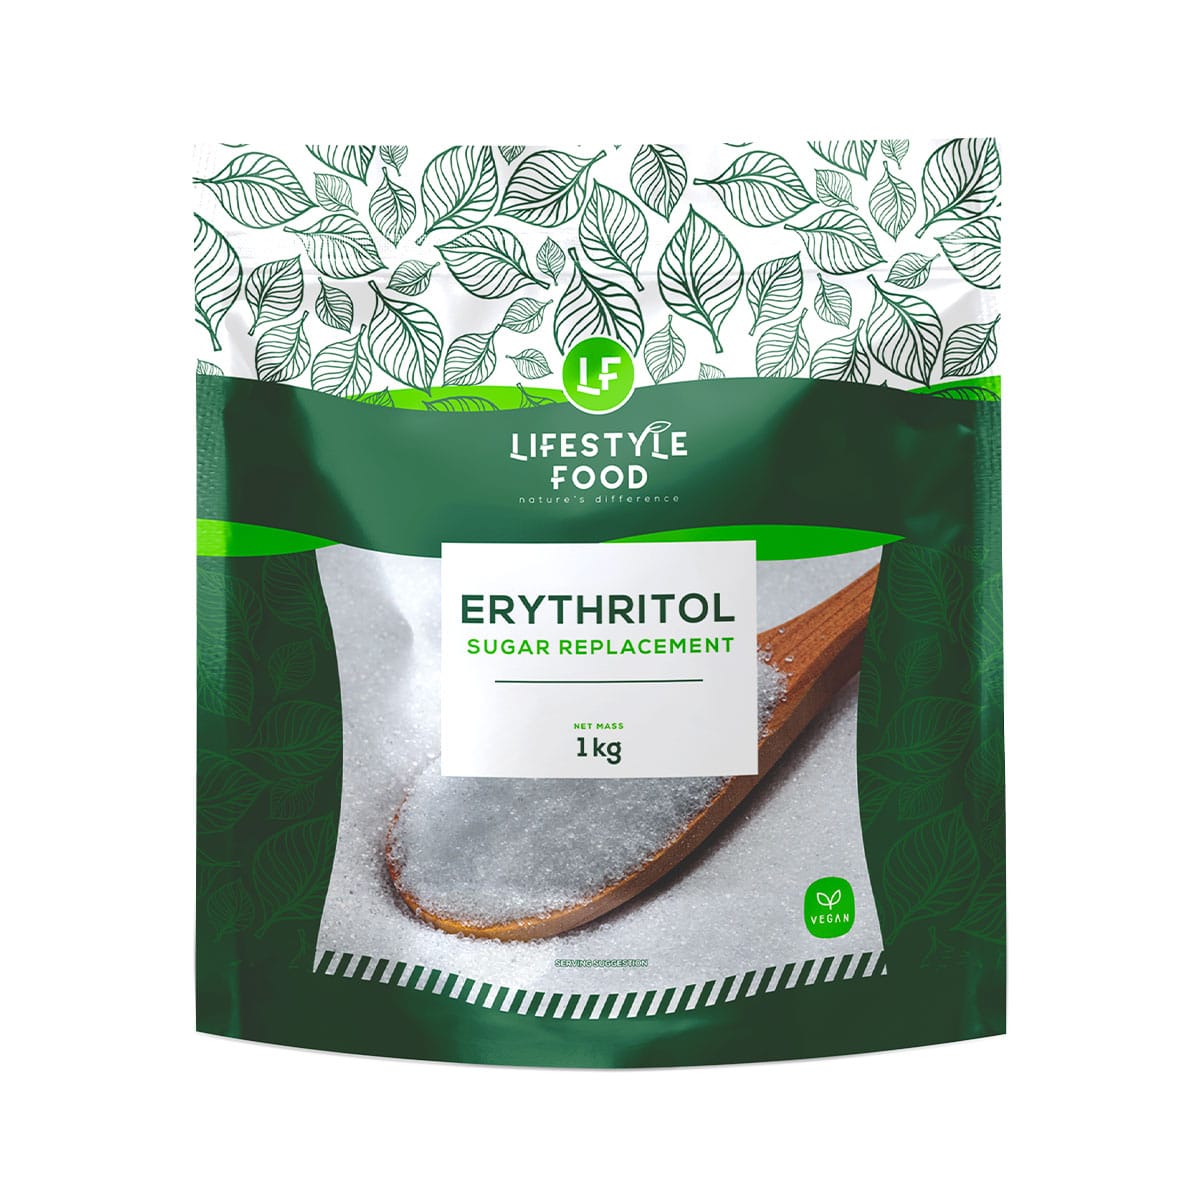 Lifestyle Food Erythritol Sugar Replacement - 1kg